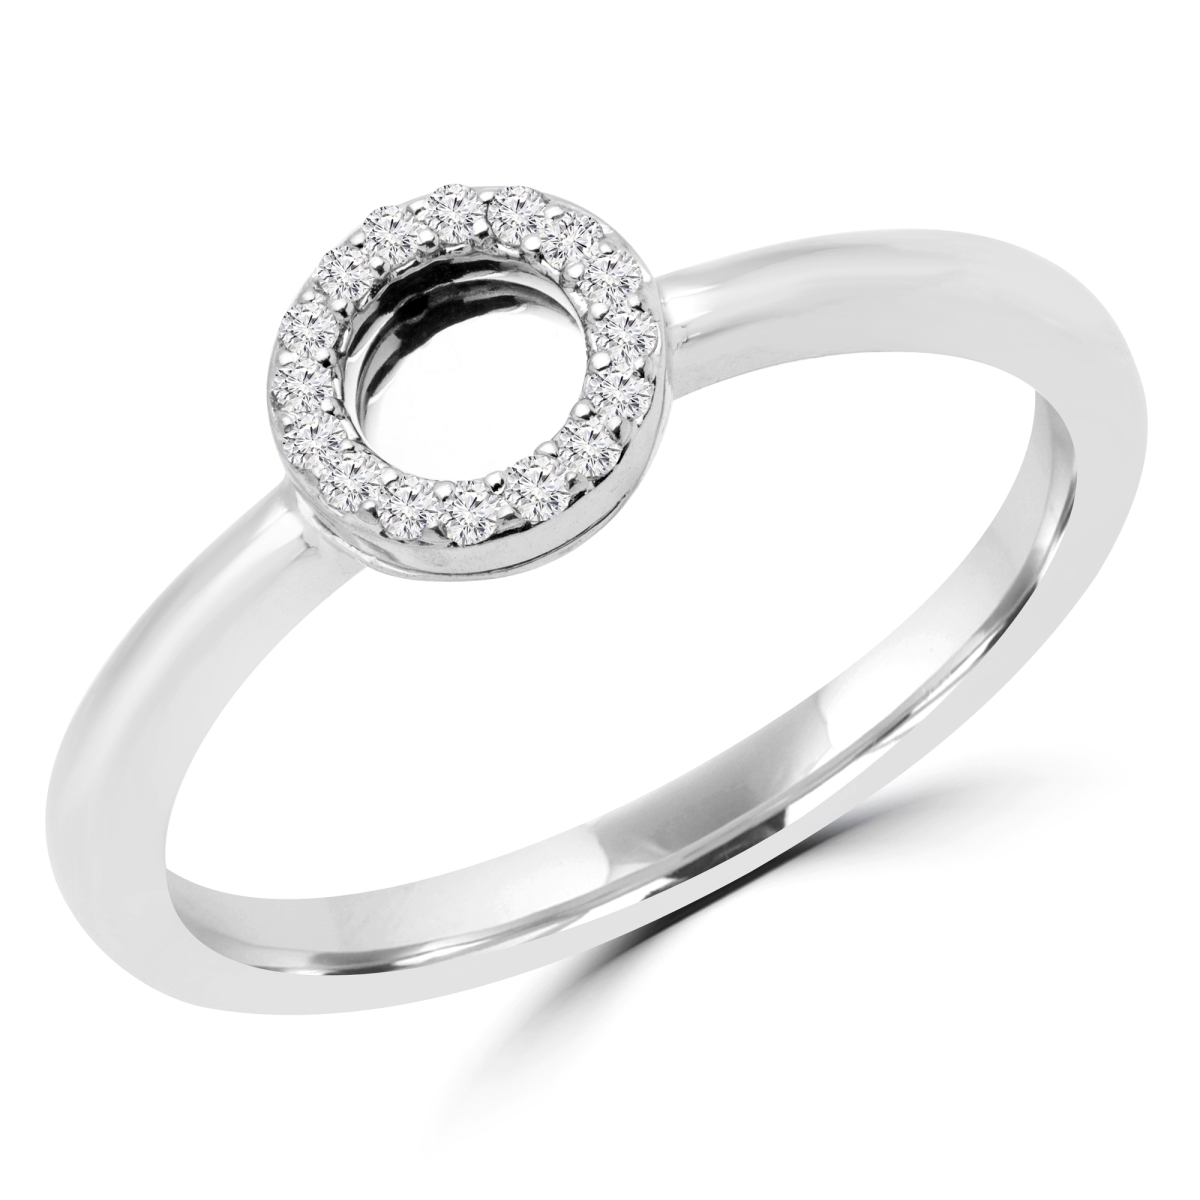 Picture of Majesty Diamonds MDR170066-3.25 0.1 CTW Round Diamond Cocktail Ring in 14K White Gold - Size 3.25